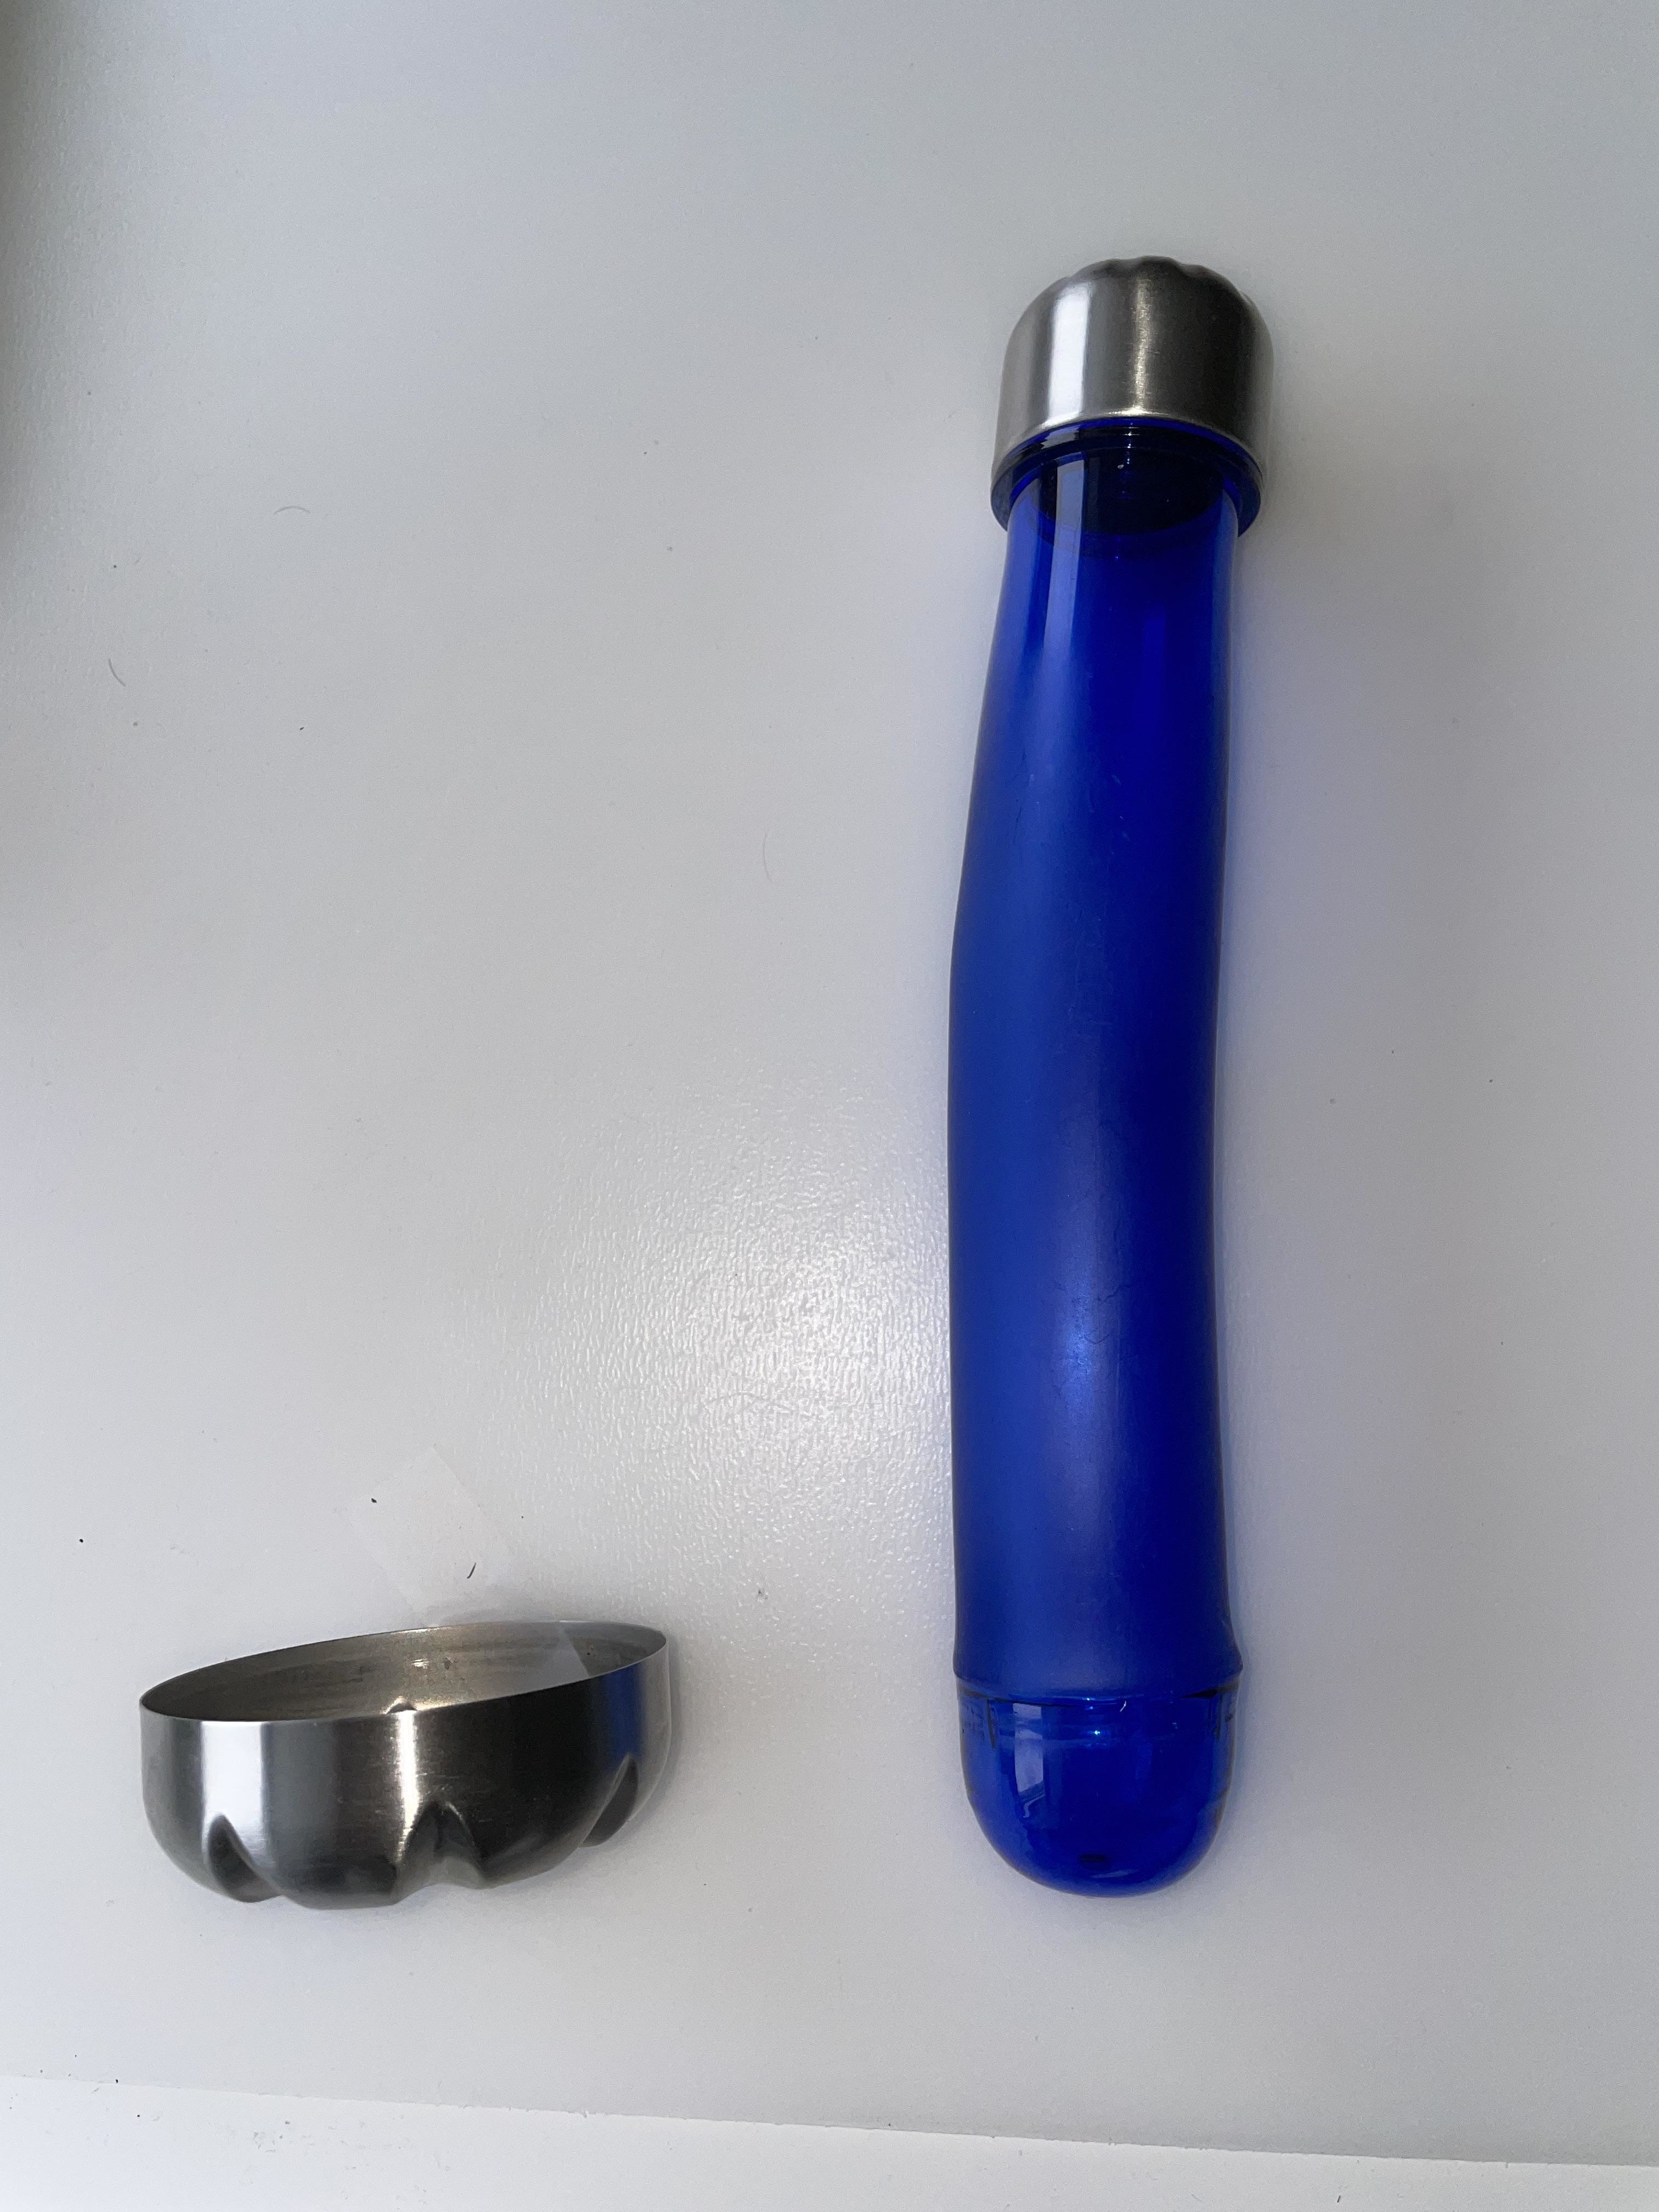 A long, blue tube with a metallic cap next to a separate silver-colored, wider round cap